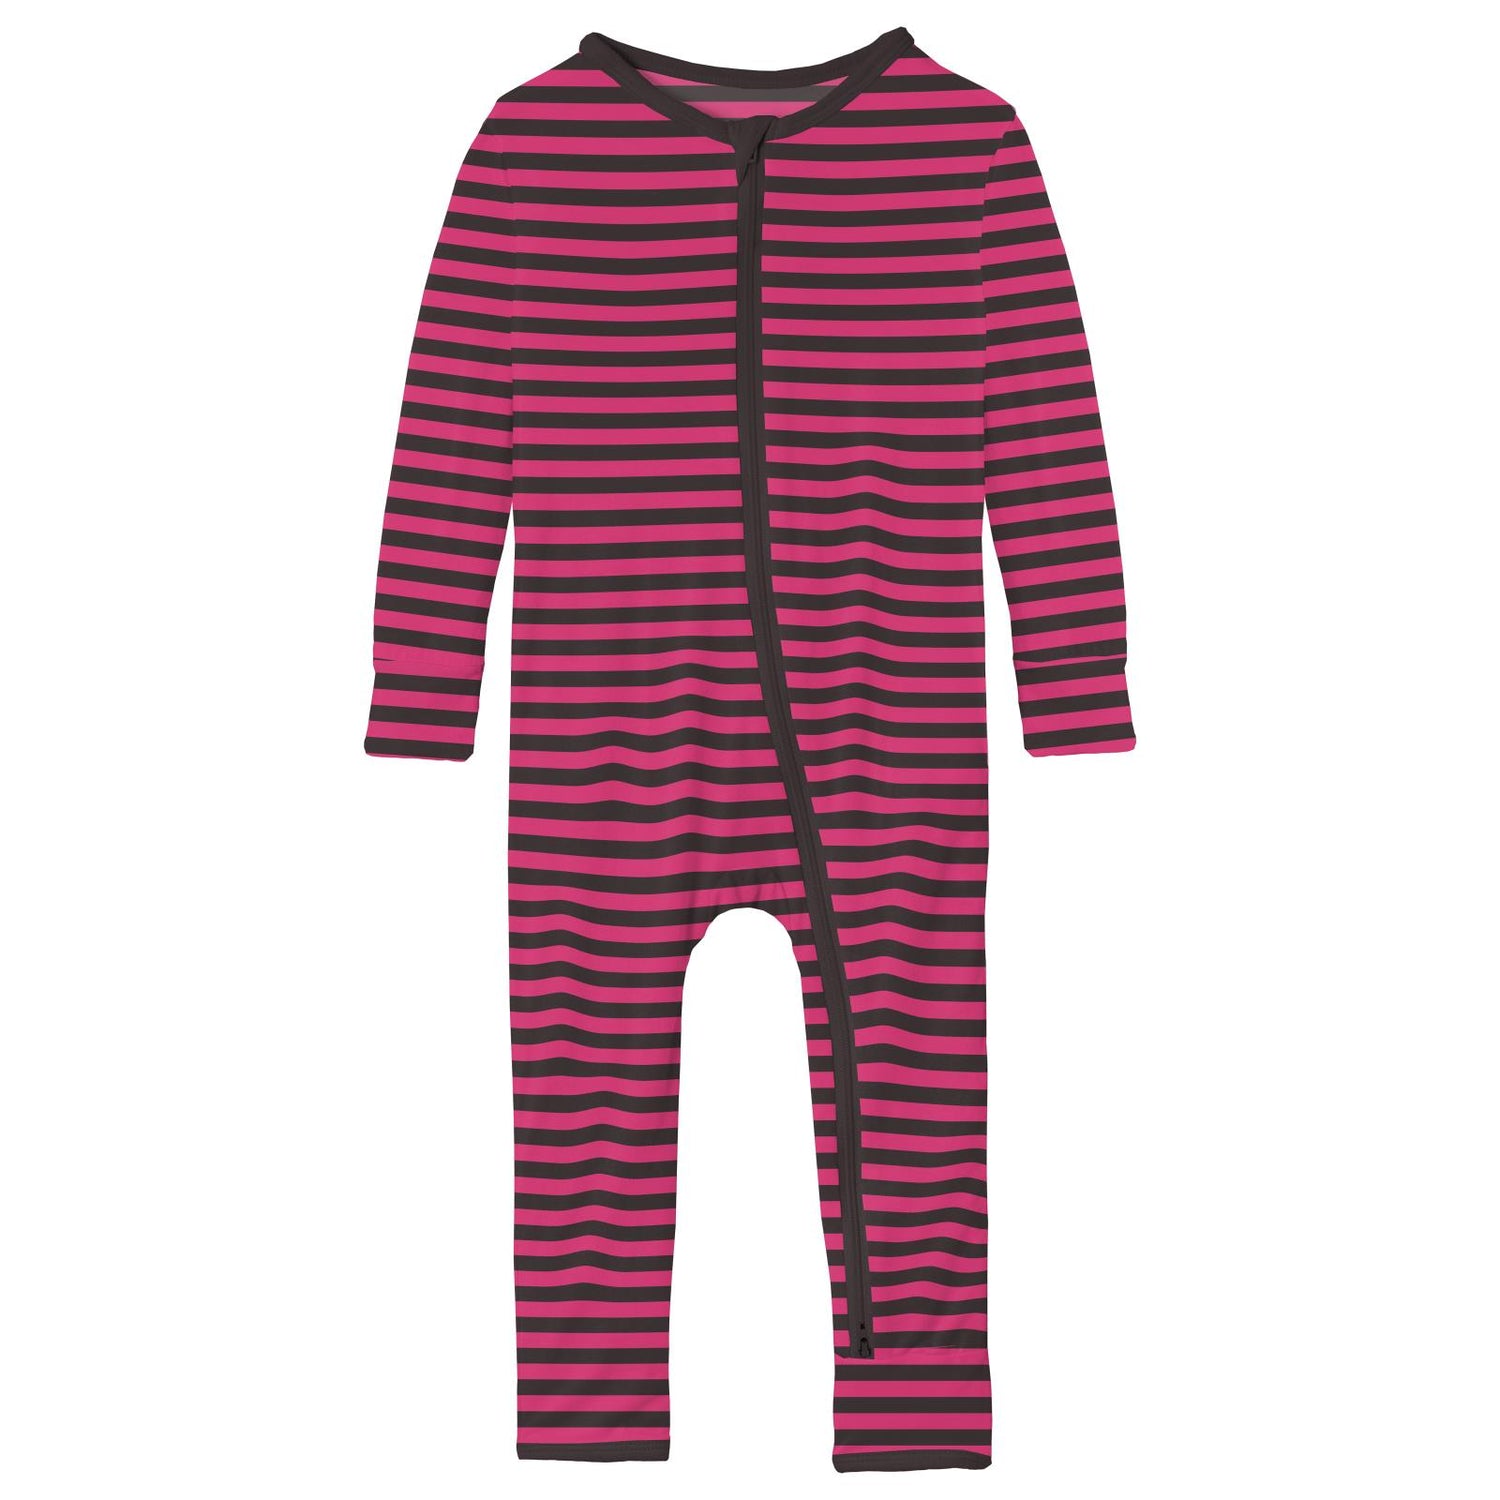 Print Coverall with 2 Way Zipper in Awesome Stripe